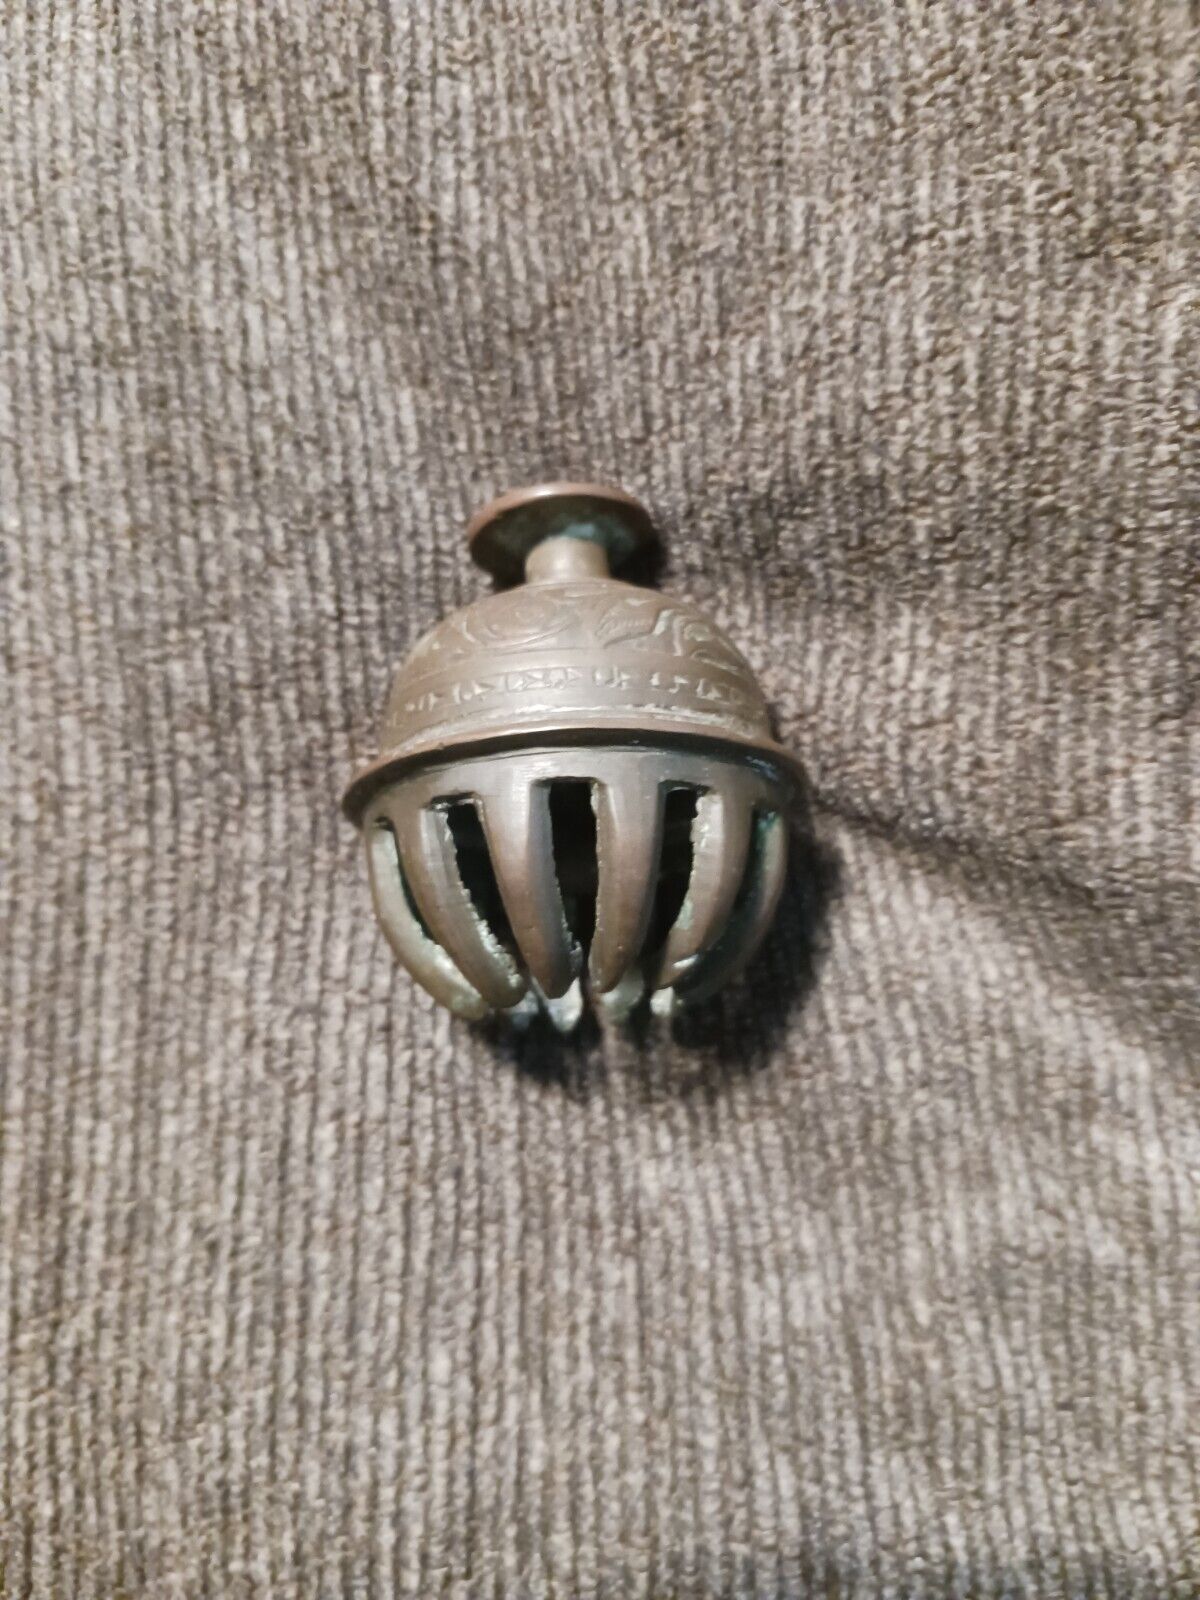 Vintage Antique Brass Claw Bell Made In India Etched Floral Design 2”